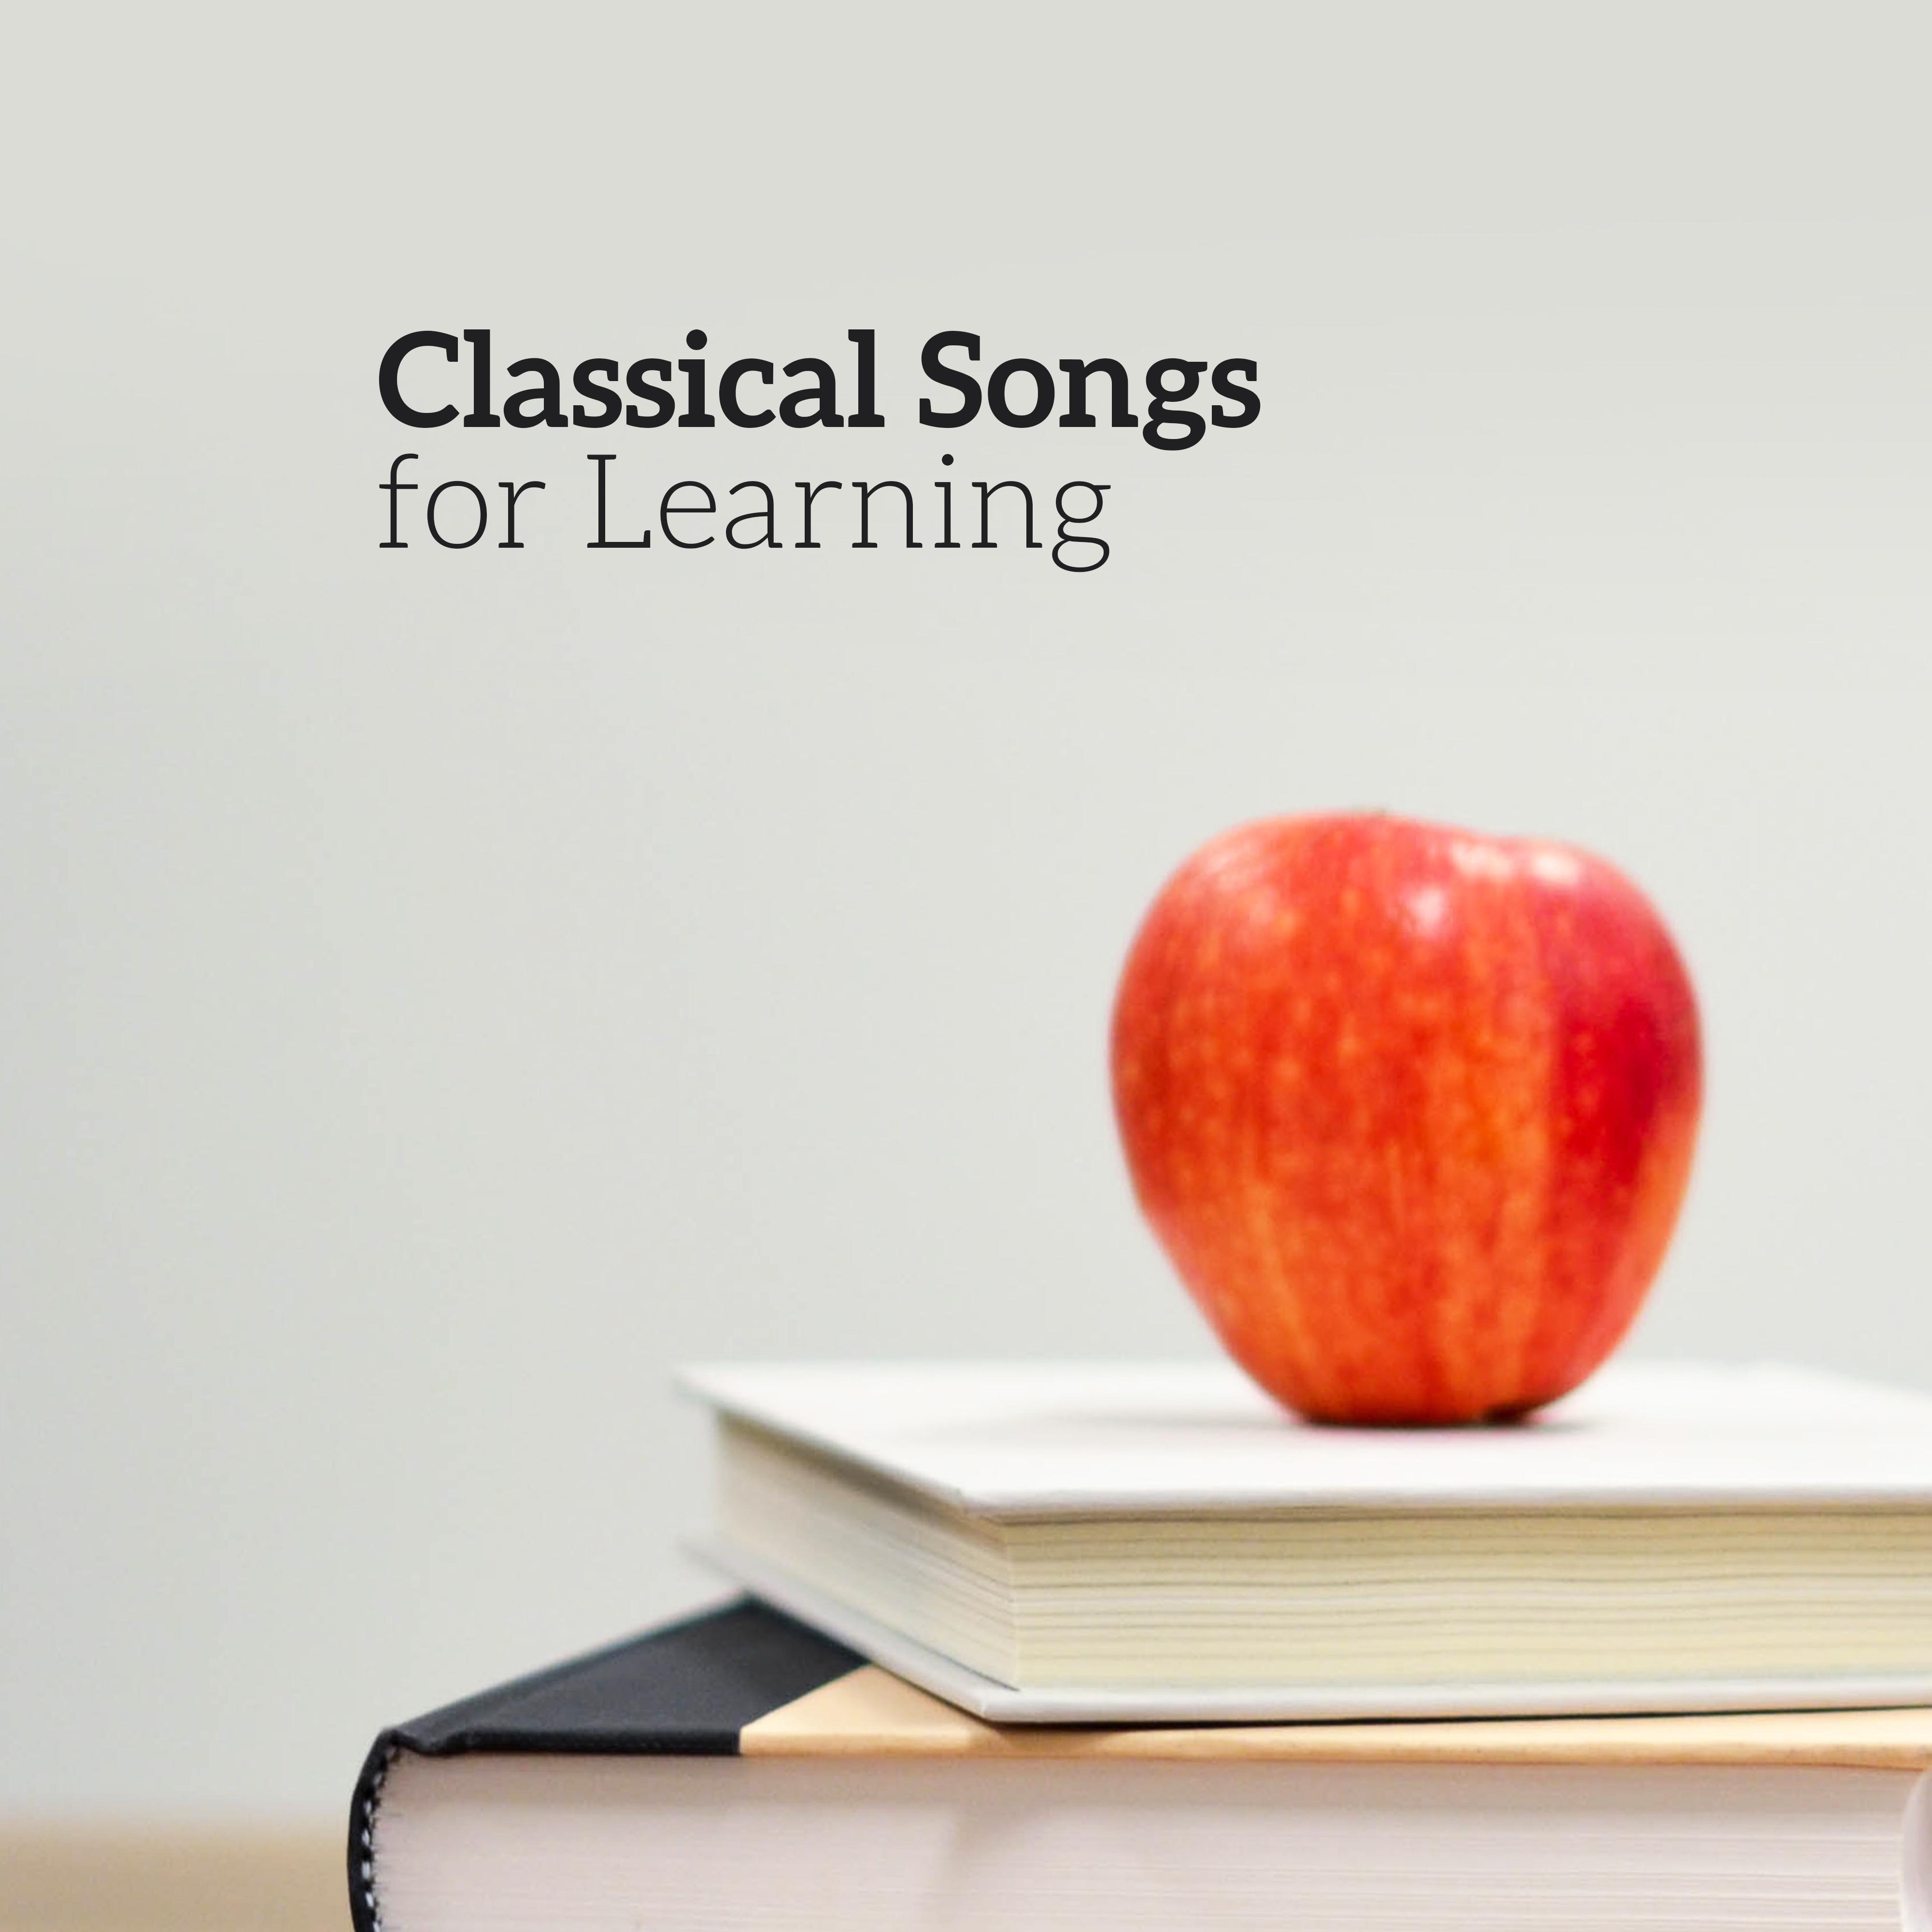 Classical Songs for Learning